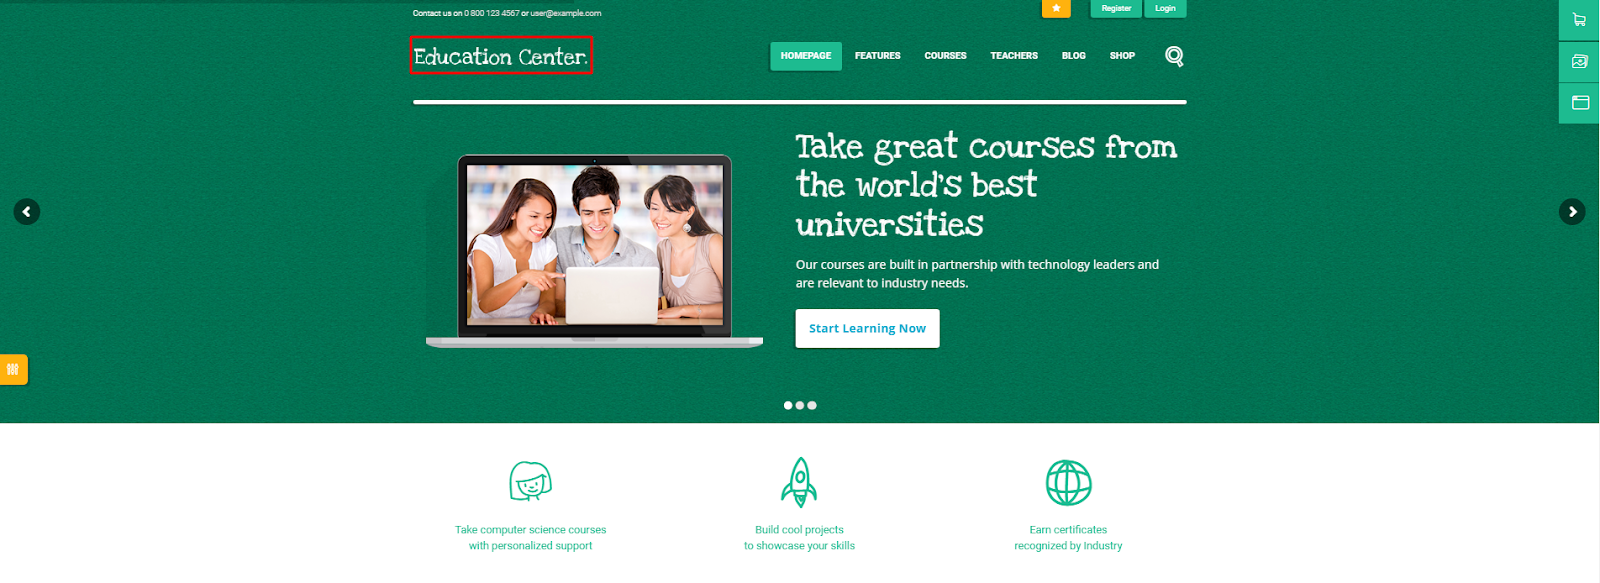 Education Centre - LMS Theme for School and University Online Courses 